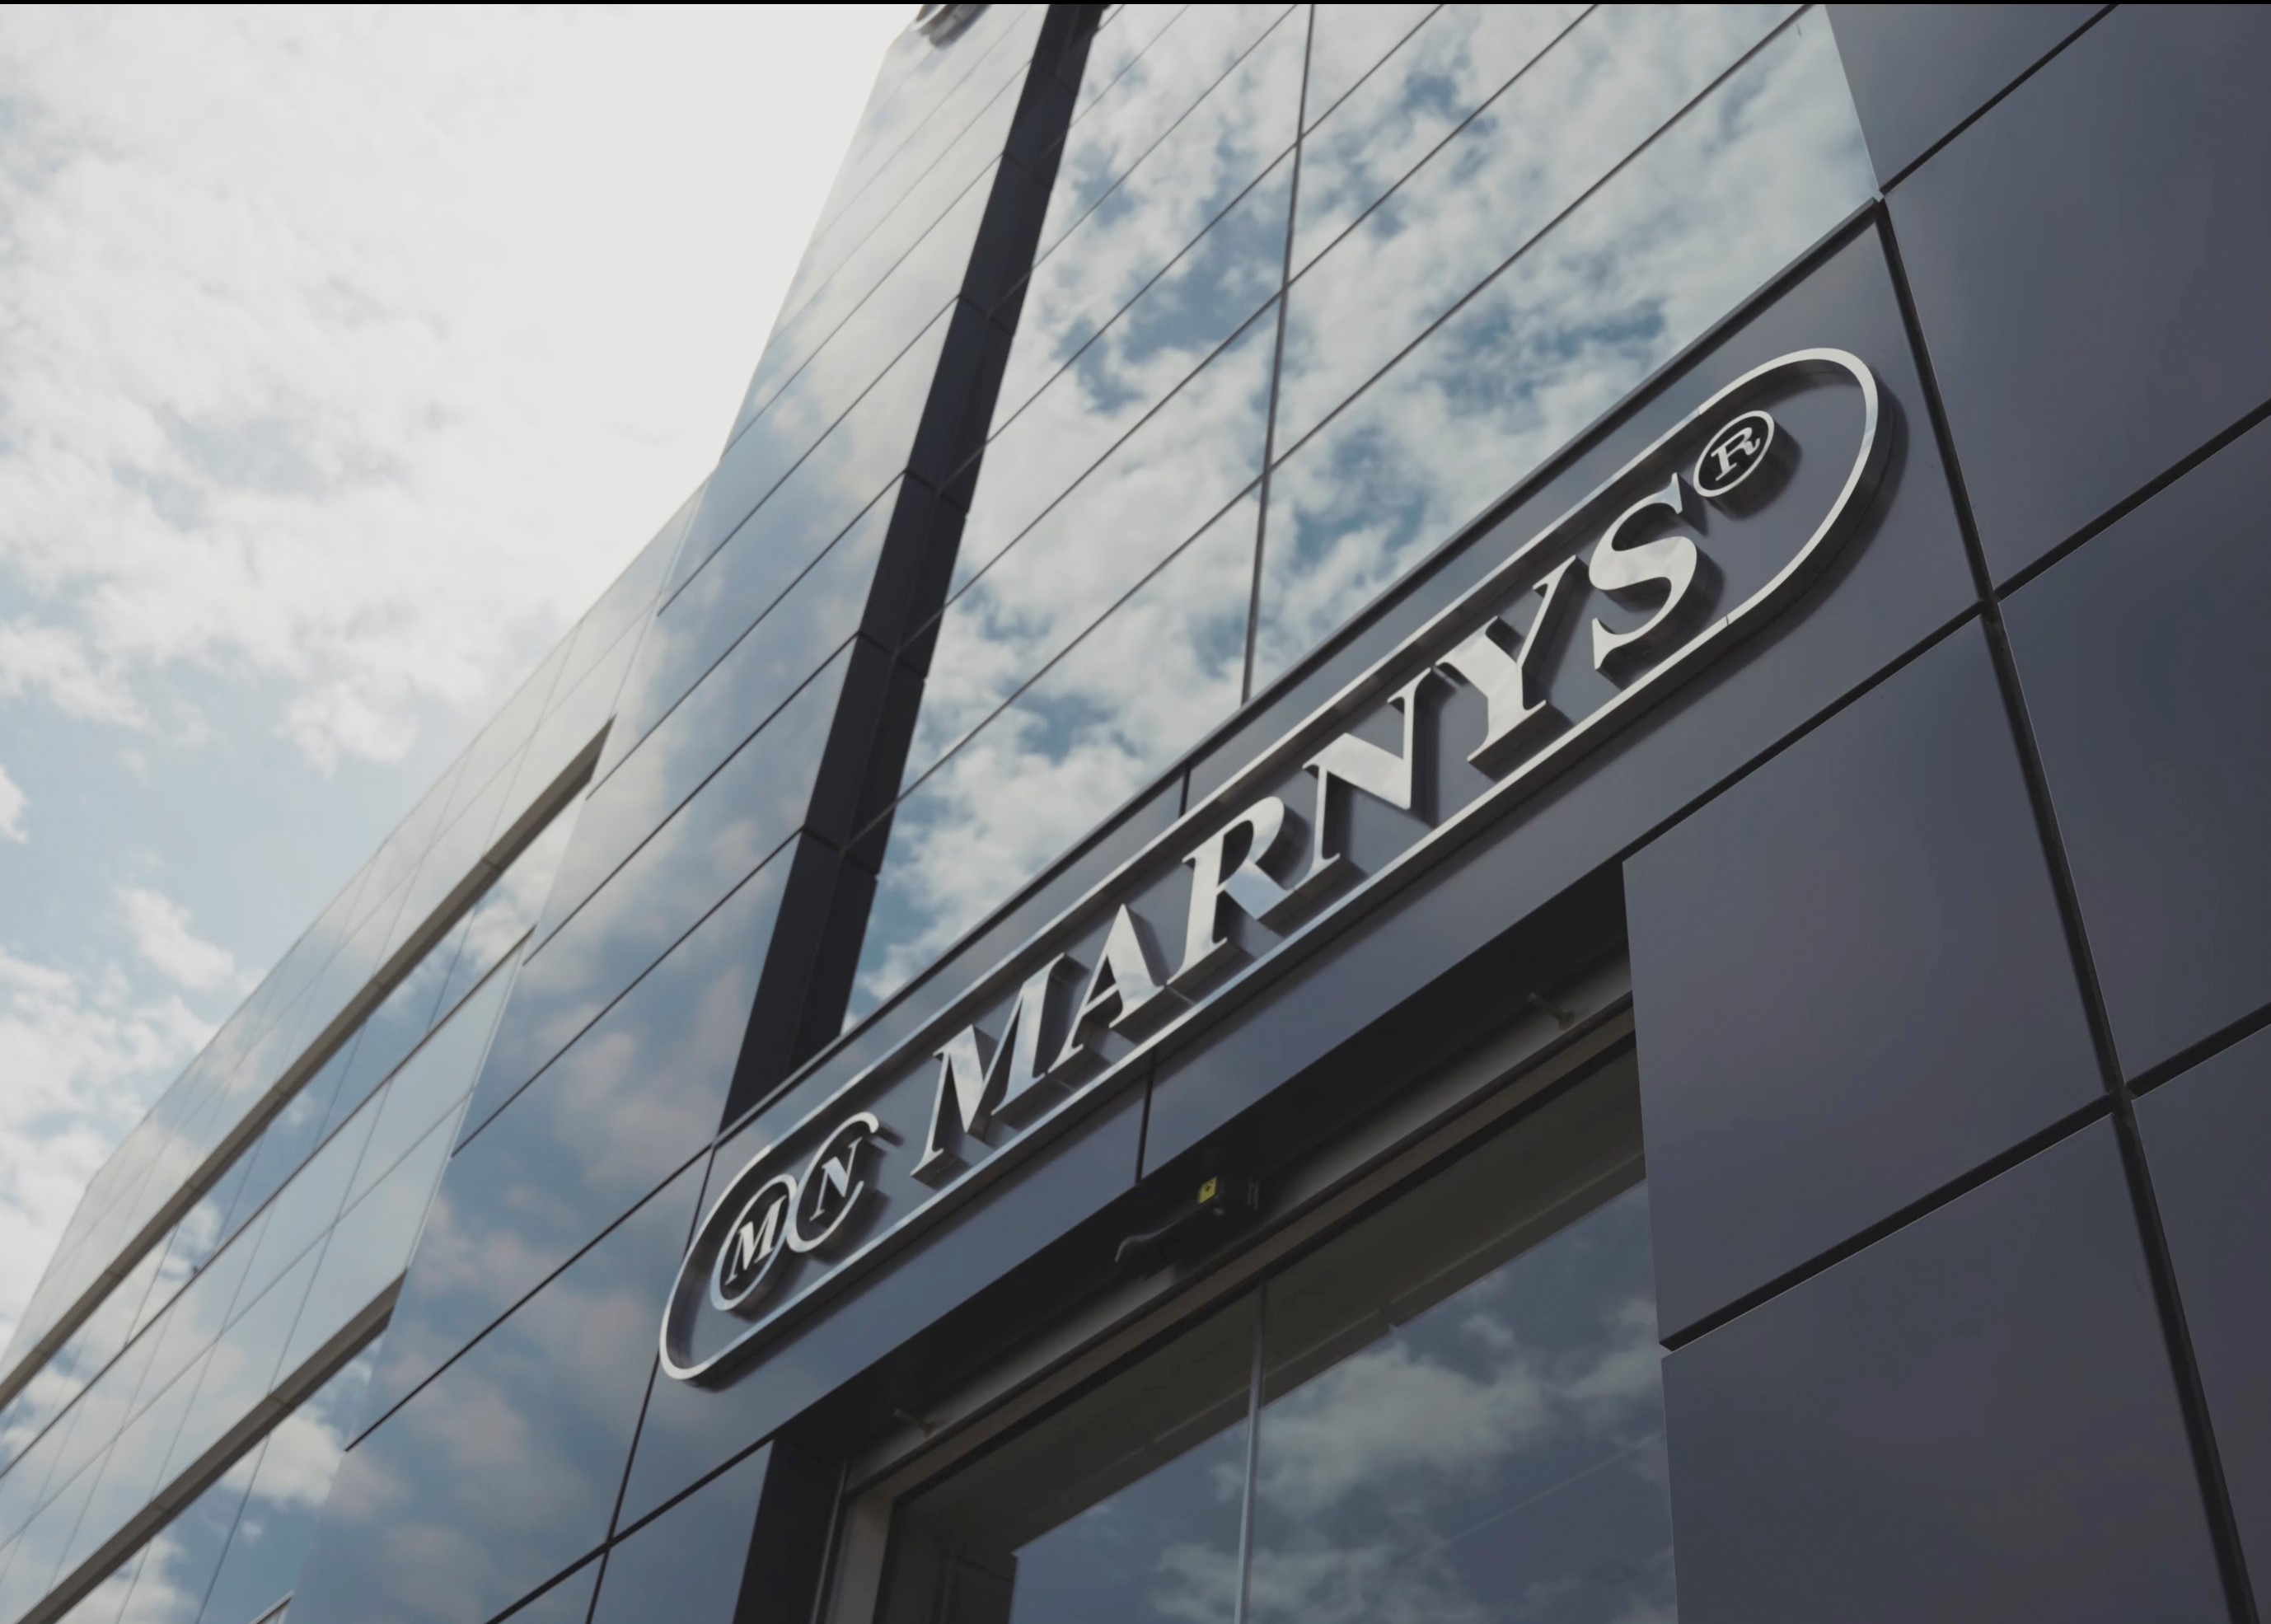 VIDEO. MARNYS celebrates 53 years bringing together nature and science to take care of you